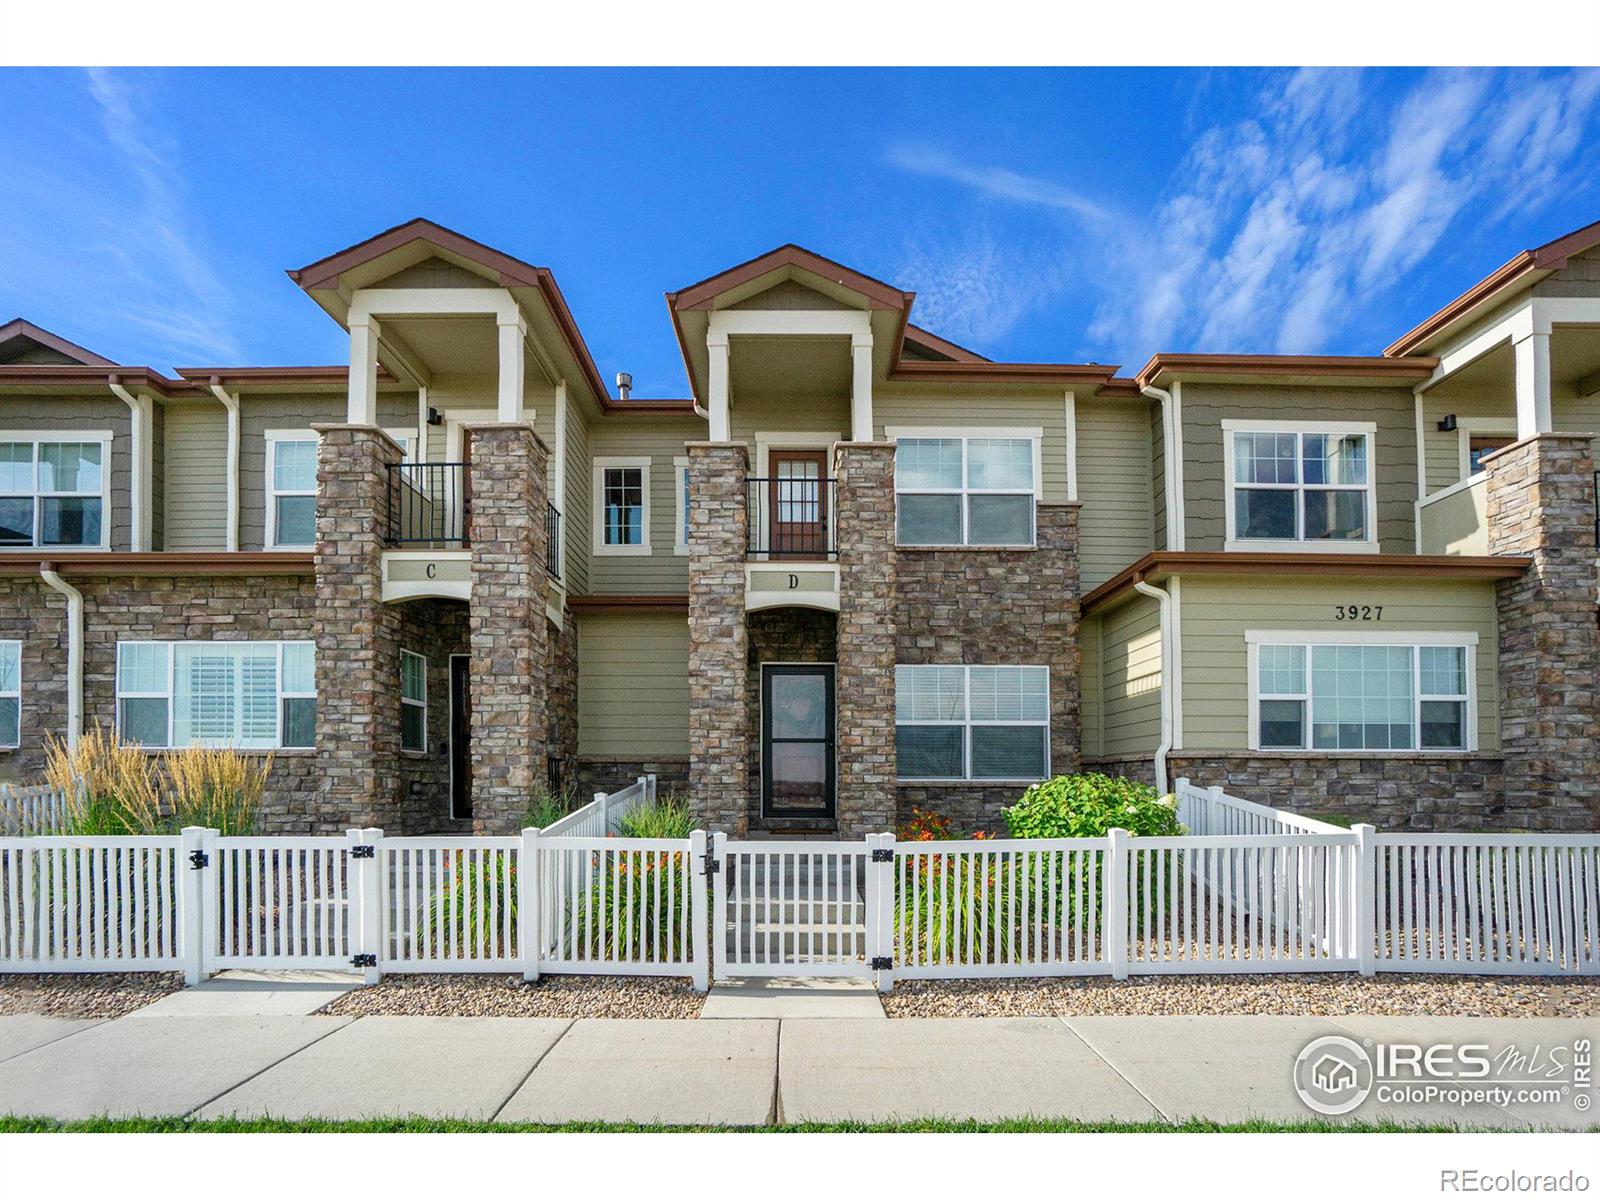 3927  Le Fever Drive, fort collins MLS: 456789993806 Beds: 2 Baths: 3 Price: $484,500